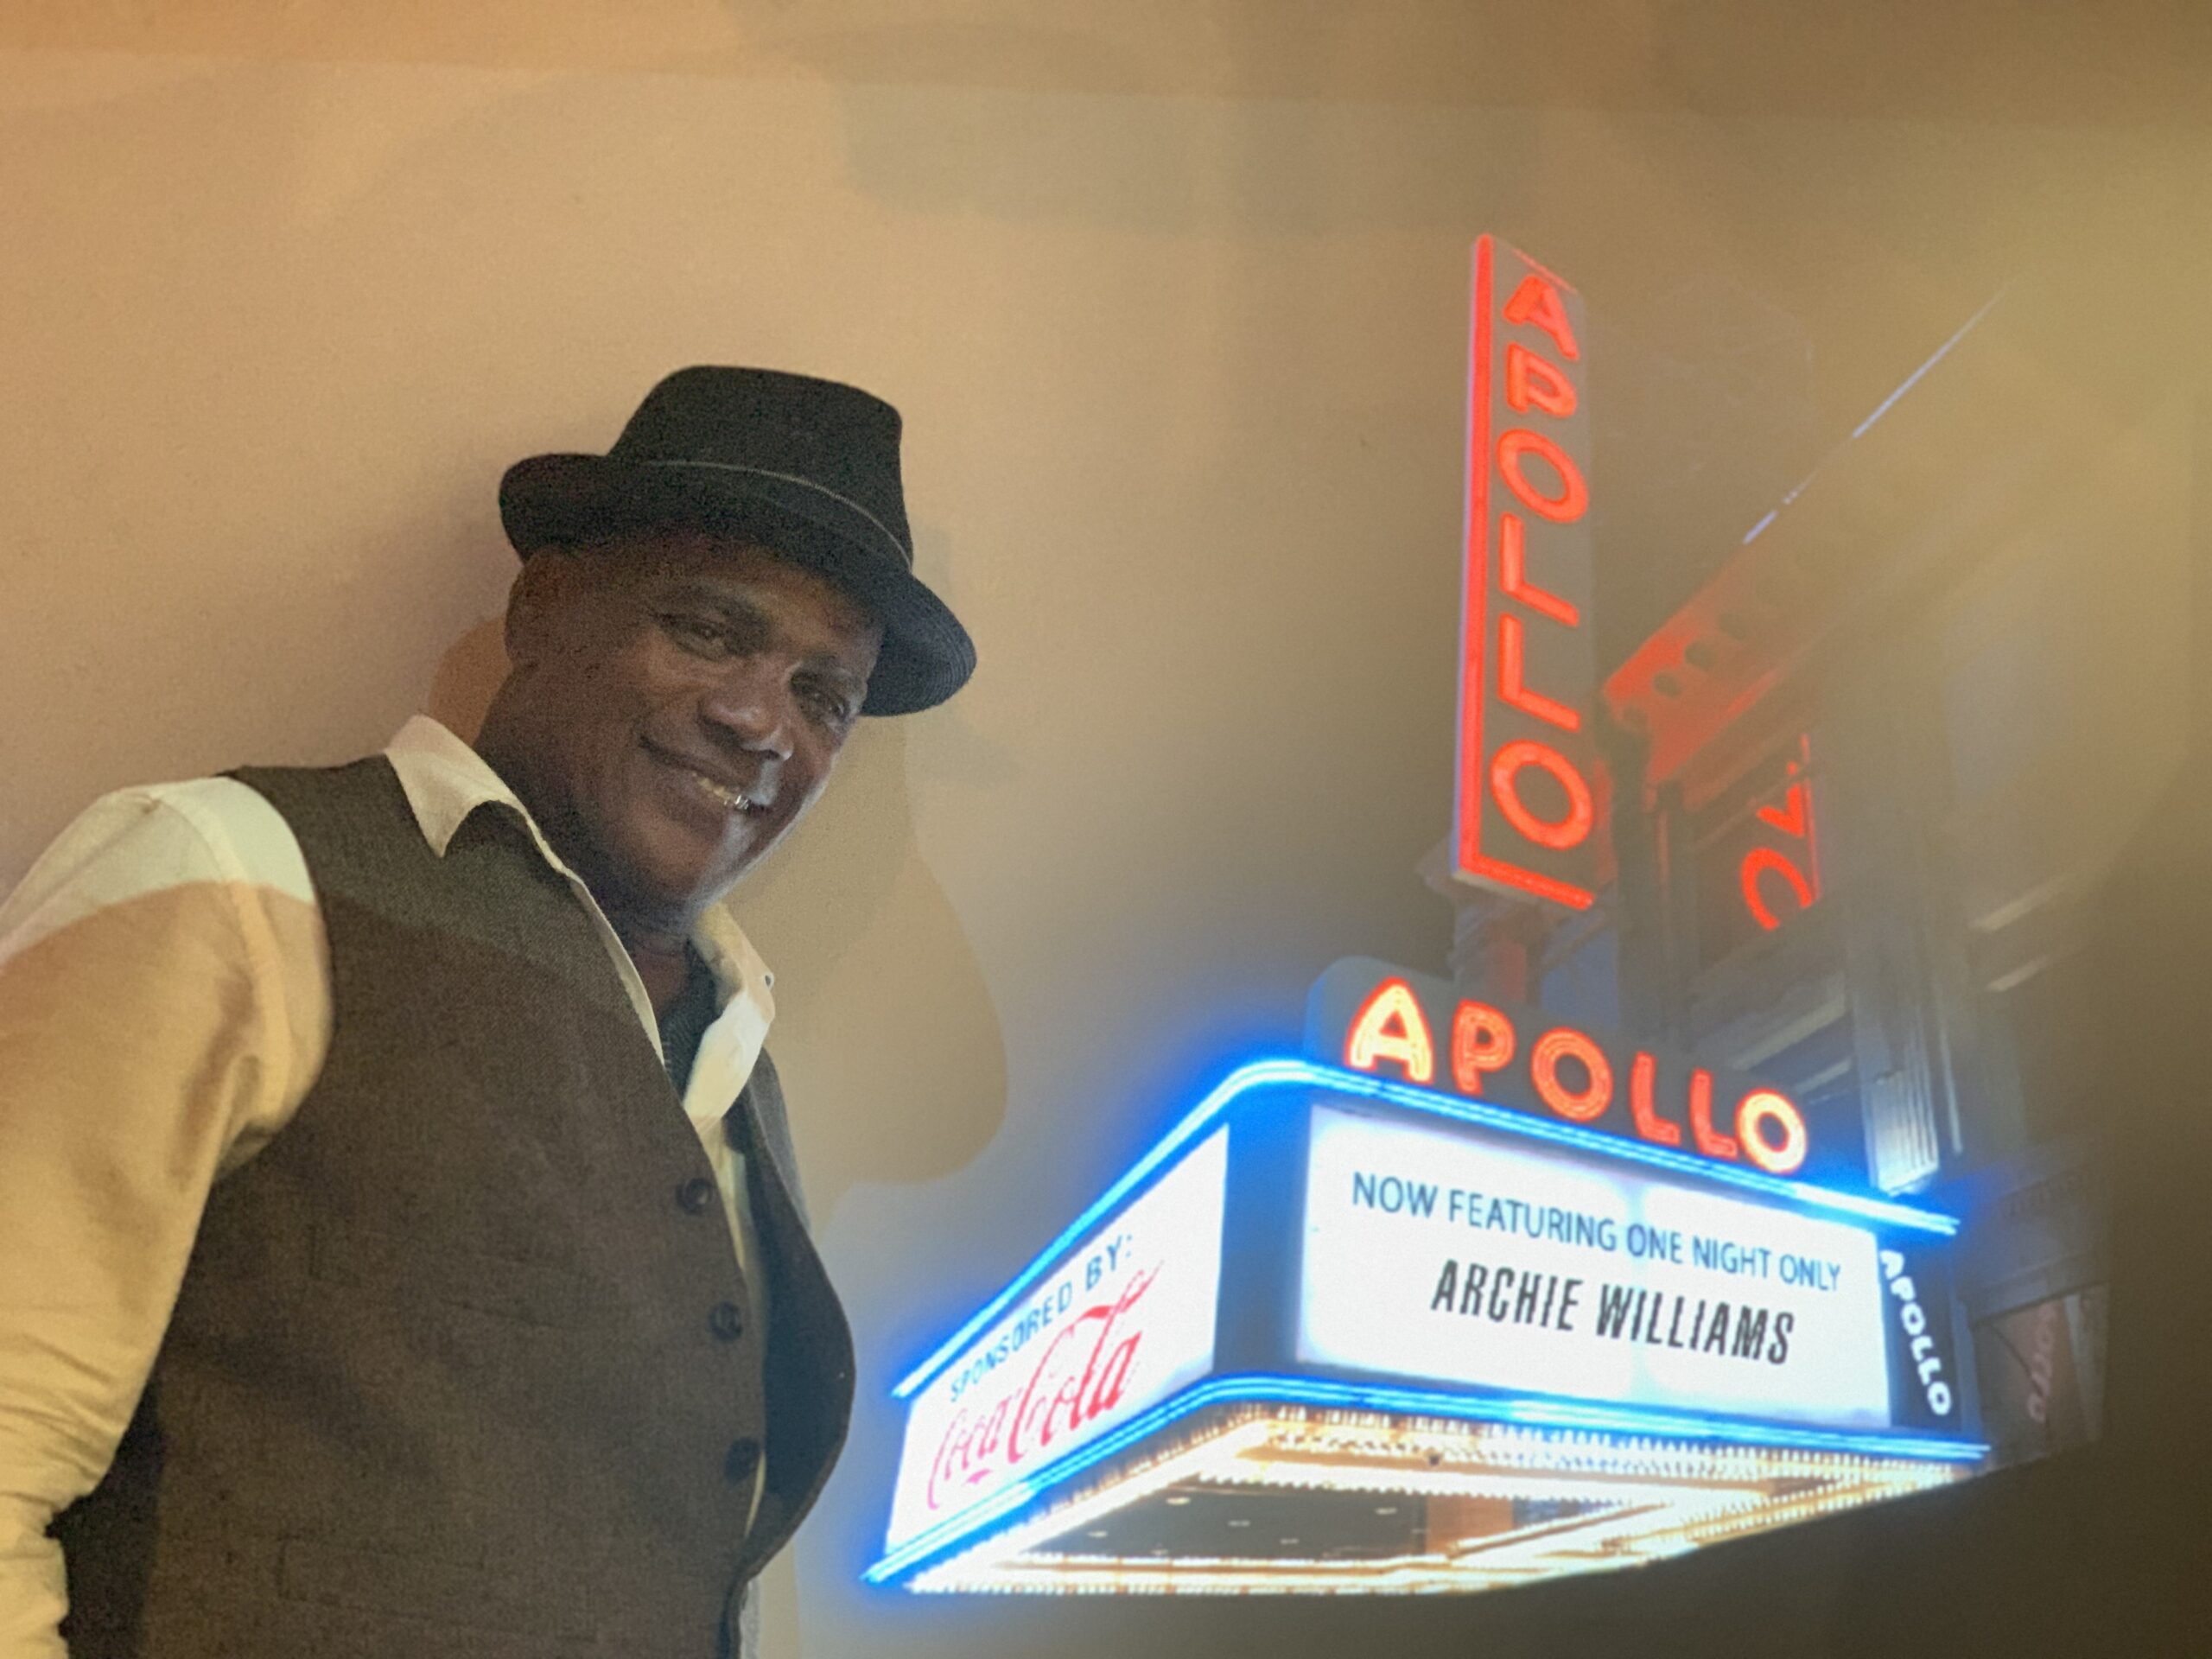 Archie Williams at the Apollo Theater in September 2019. Photo by Vanessa Potkin/Innocence Project.